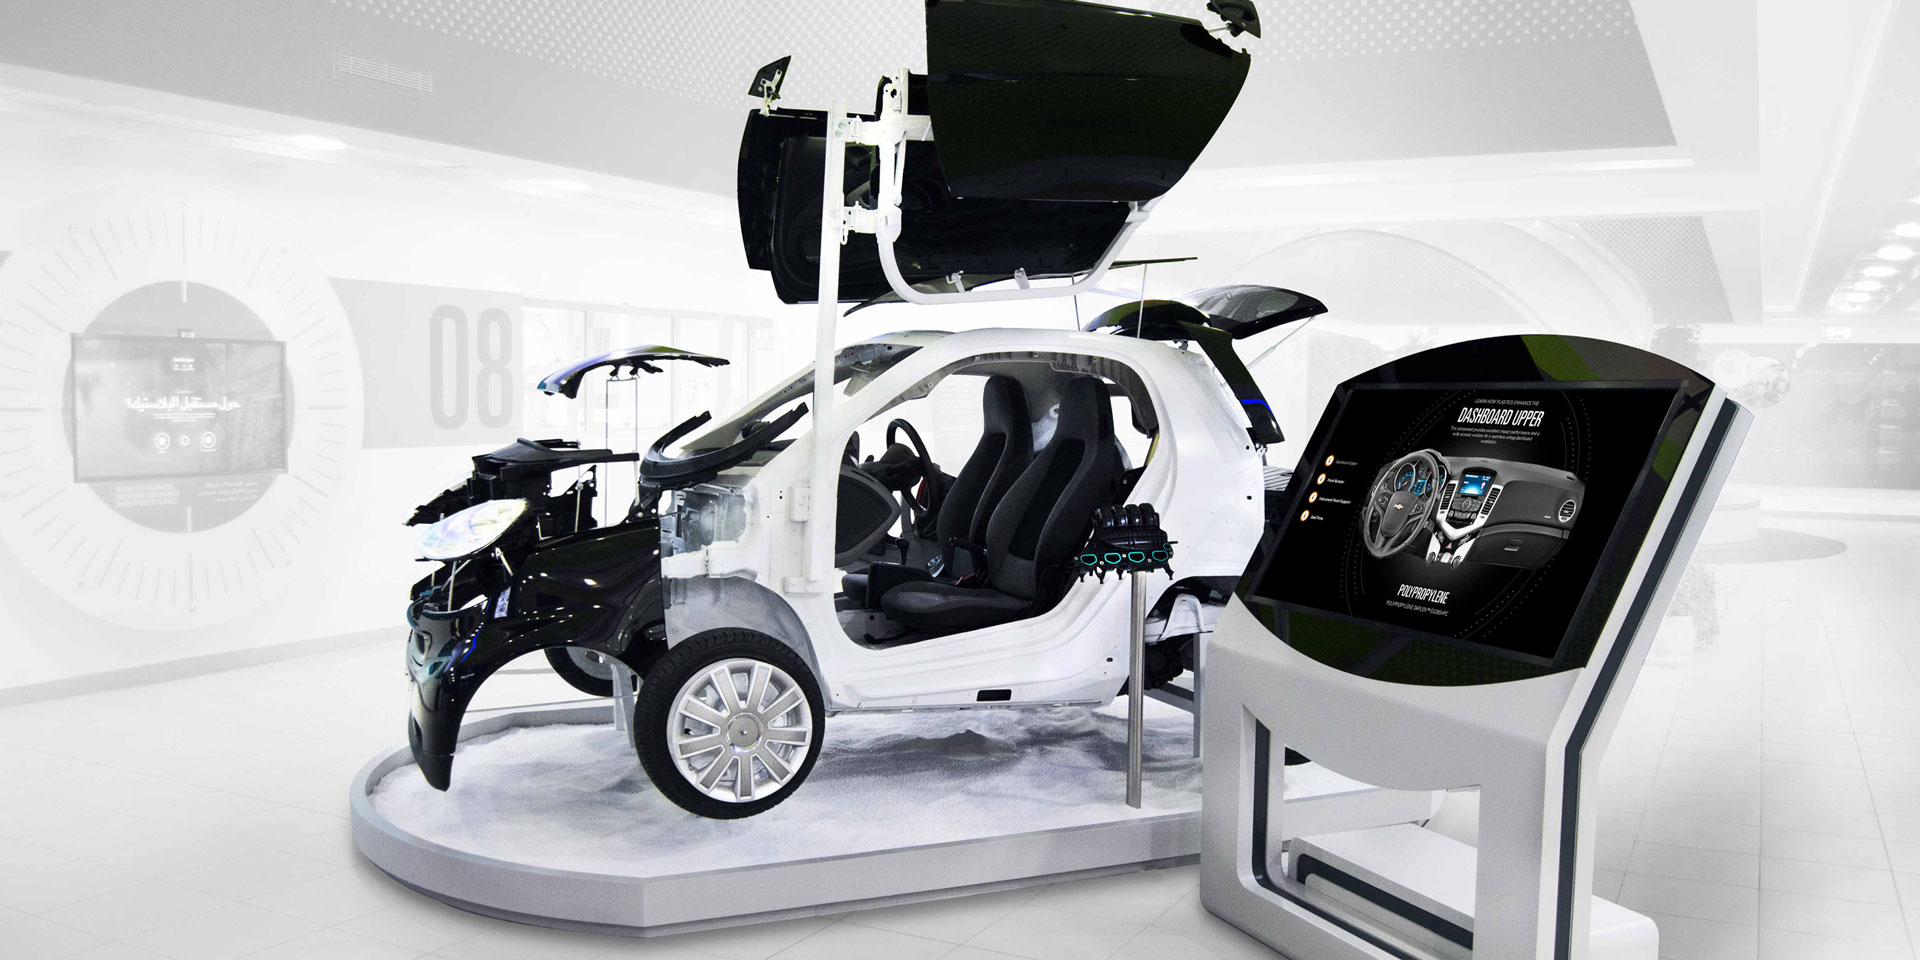 a small car prototype is on display in a showroom designed for Borouge